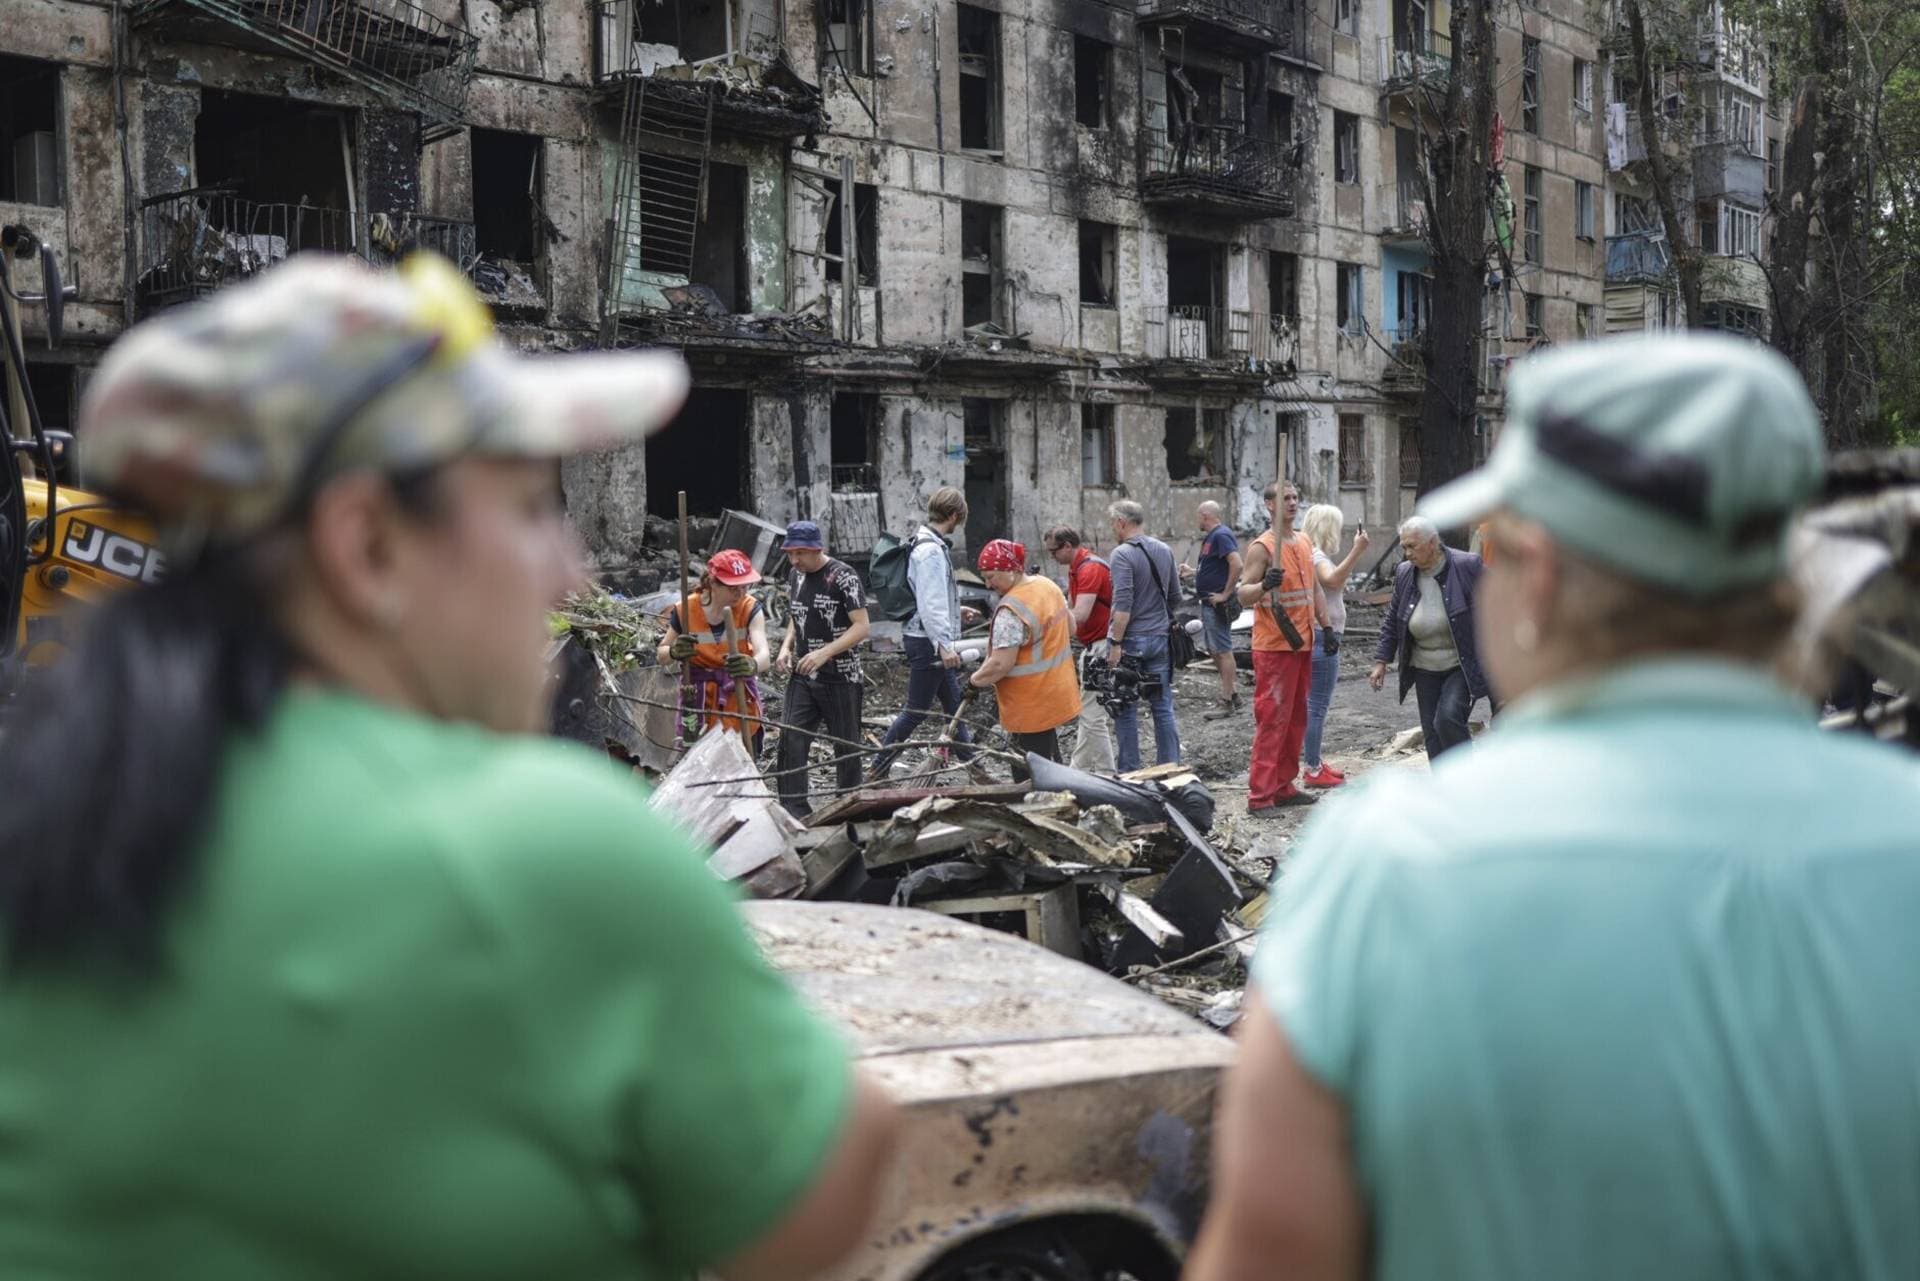 Municipal workers clean the site of the latest Russian rocket attack that damaged a multi-storey apartment building in Kryvyi Rih